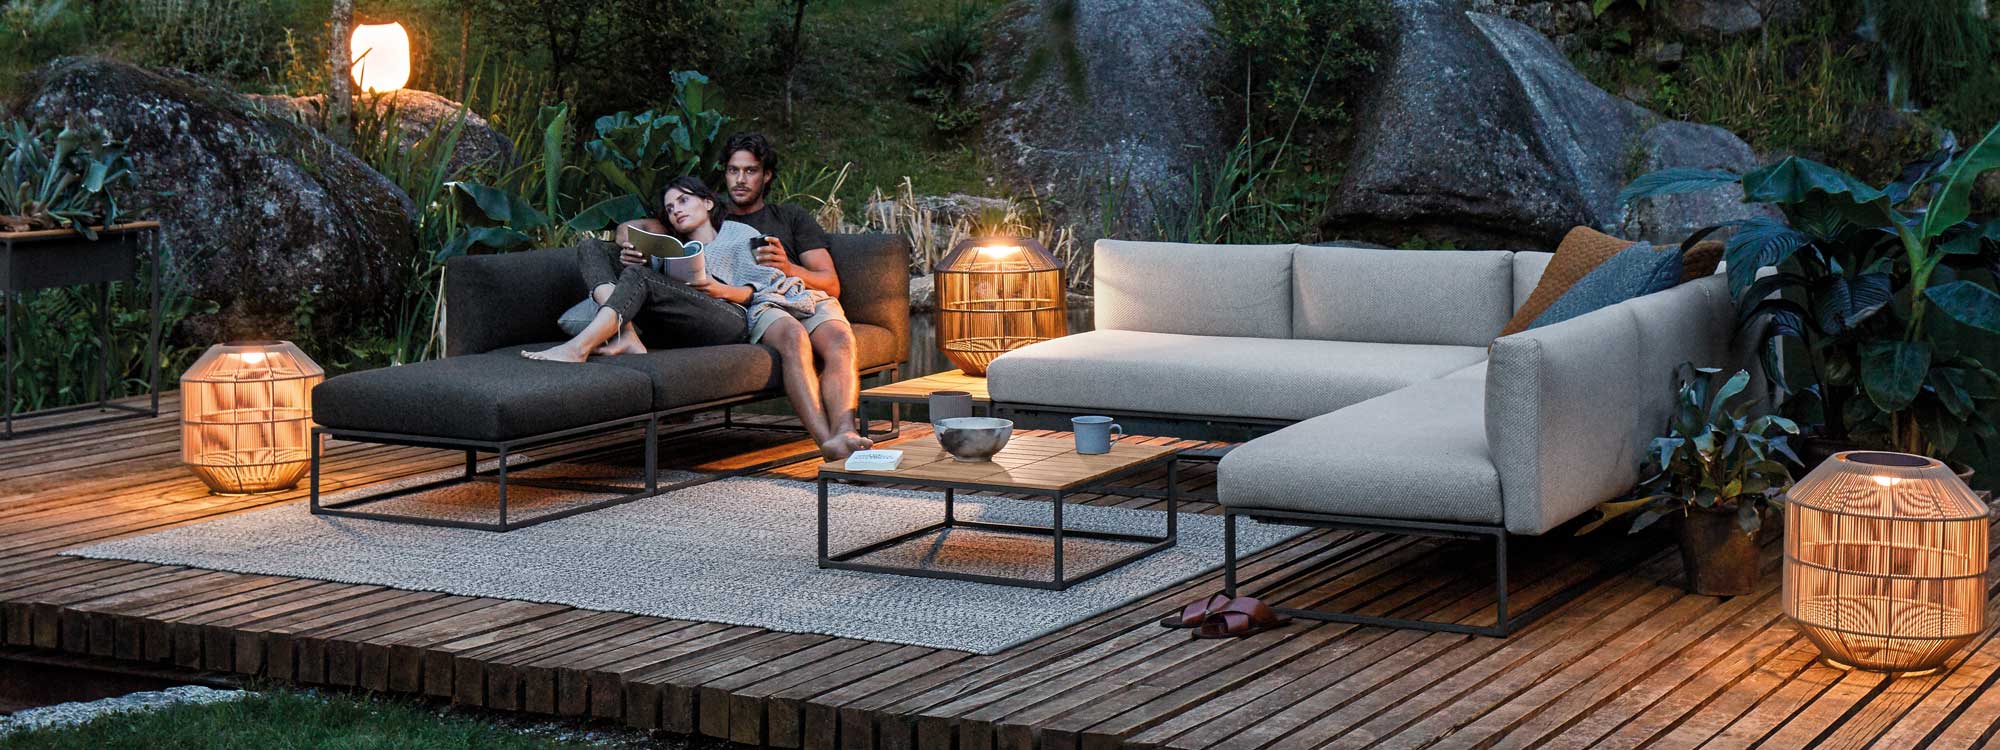 Image at dusk of couple snuggling together on Gloster Maya luxury garden sofa, punctuated by Nest garden lights